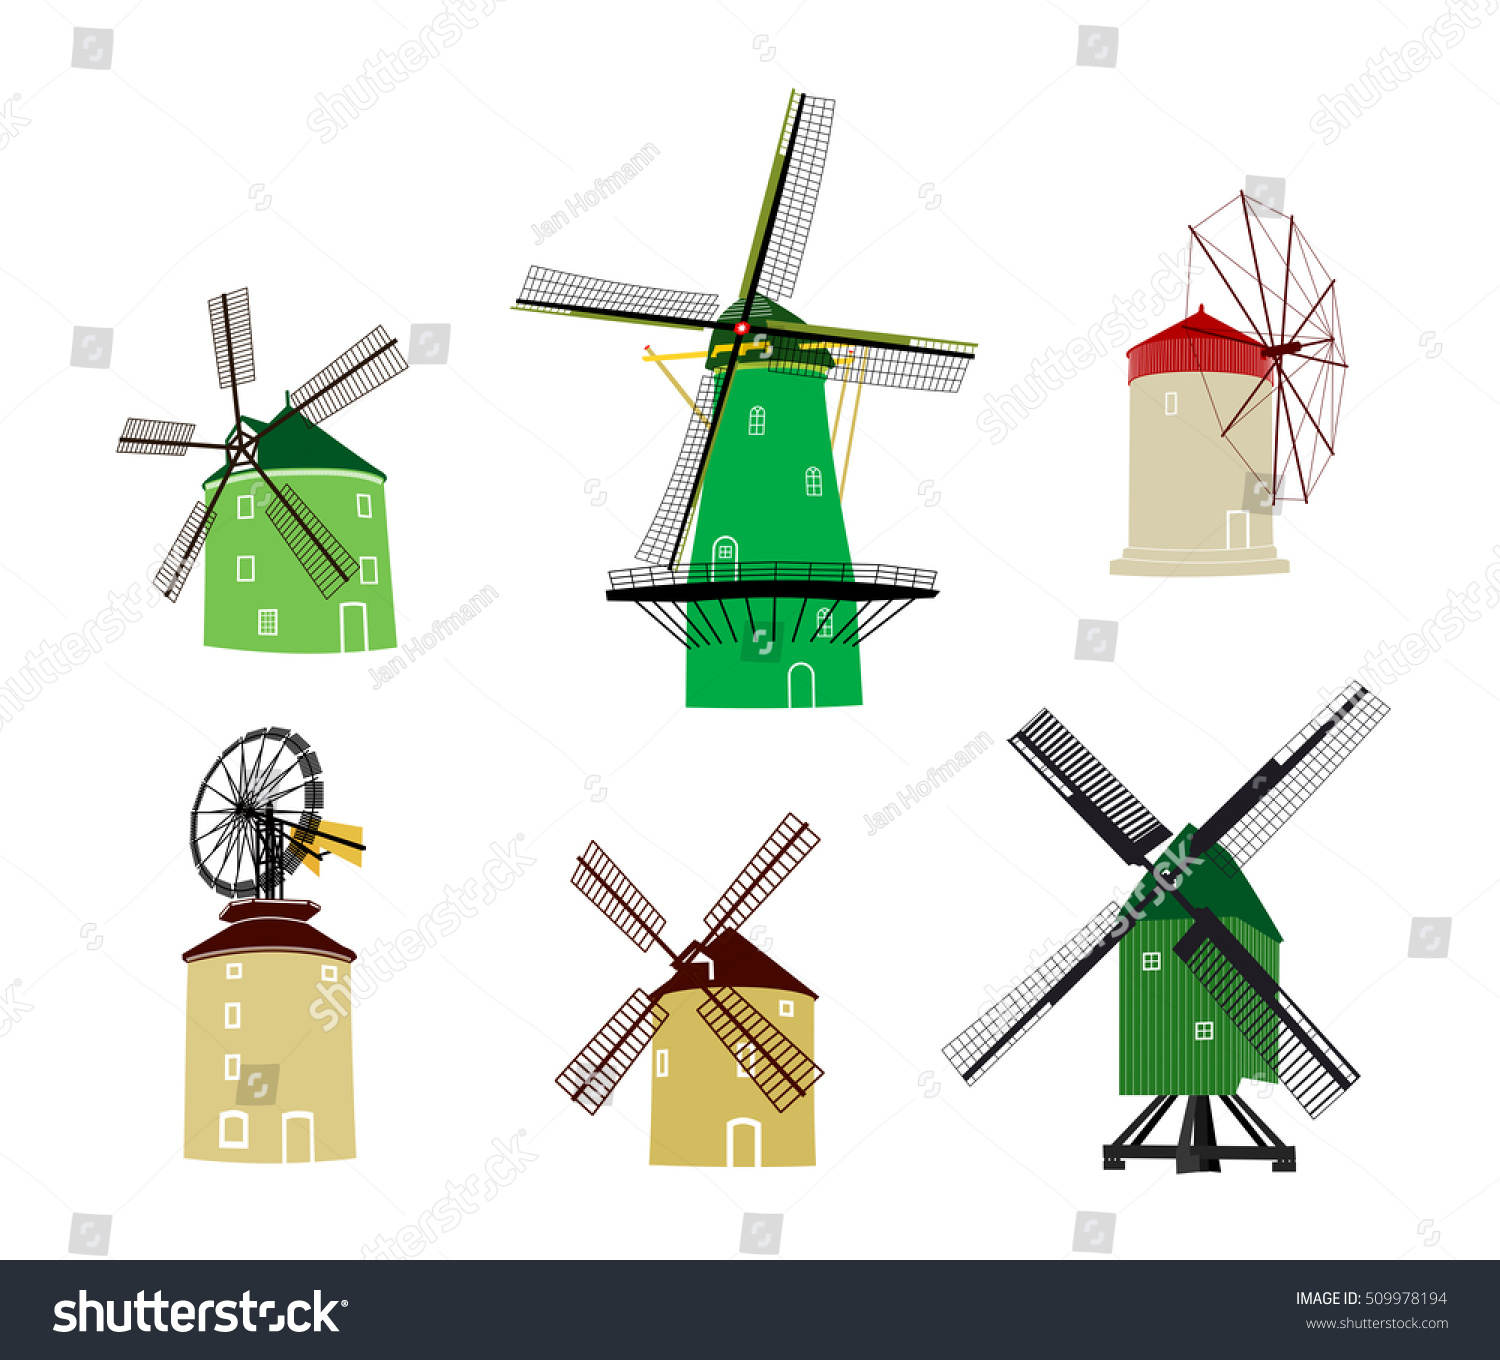 SVG of historical windmills in netherlands, greece, bohemia and germany svg